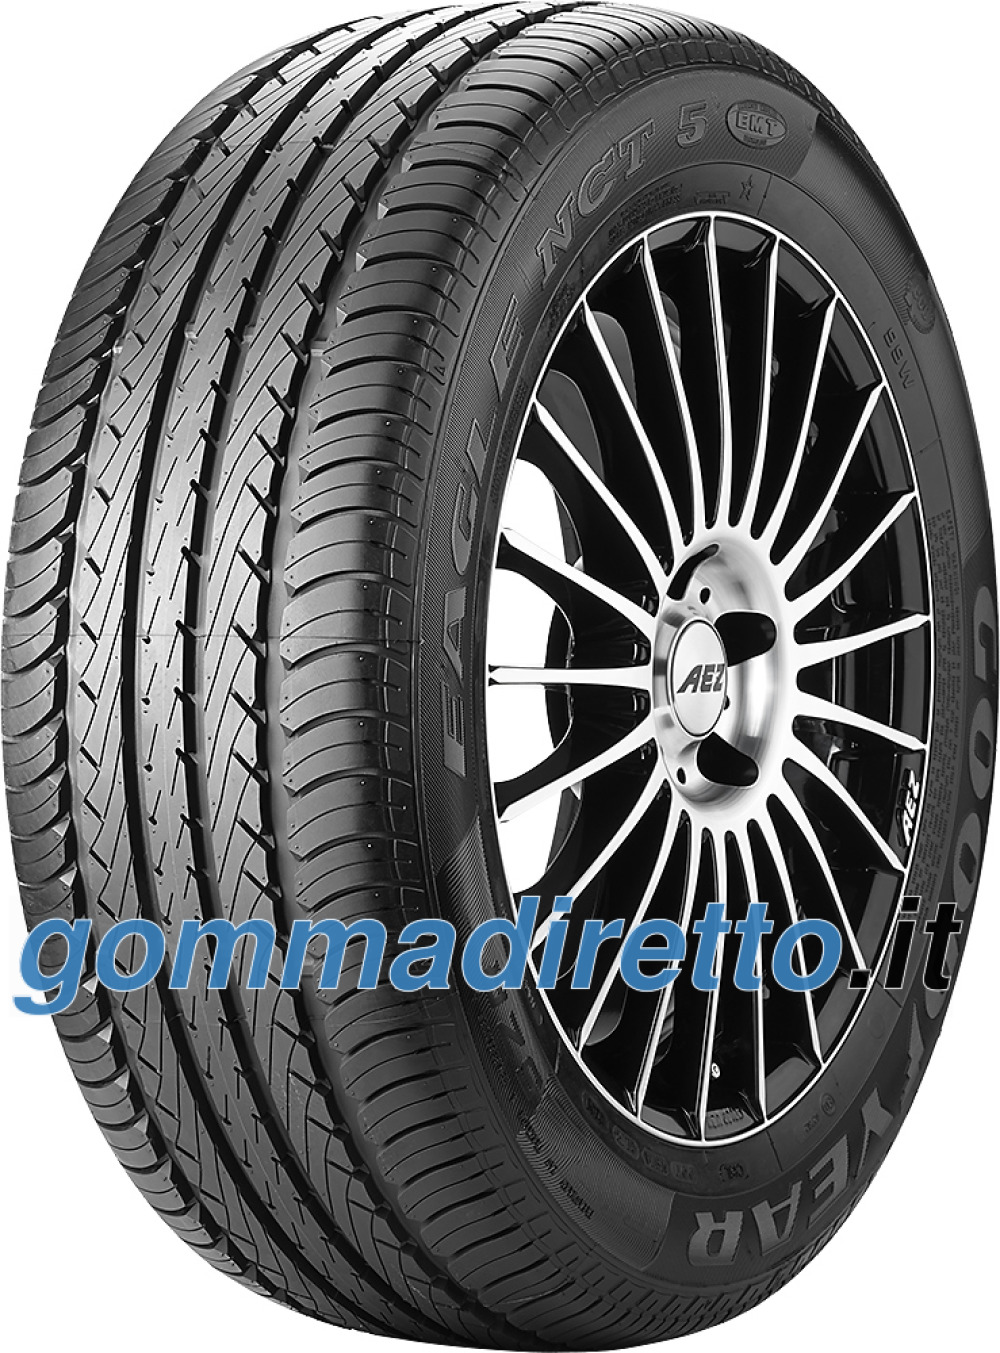 Image of Goodyear Eagle NCT 5 EMT ( 285/45 R21 109W *, runflat )